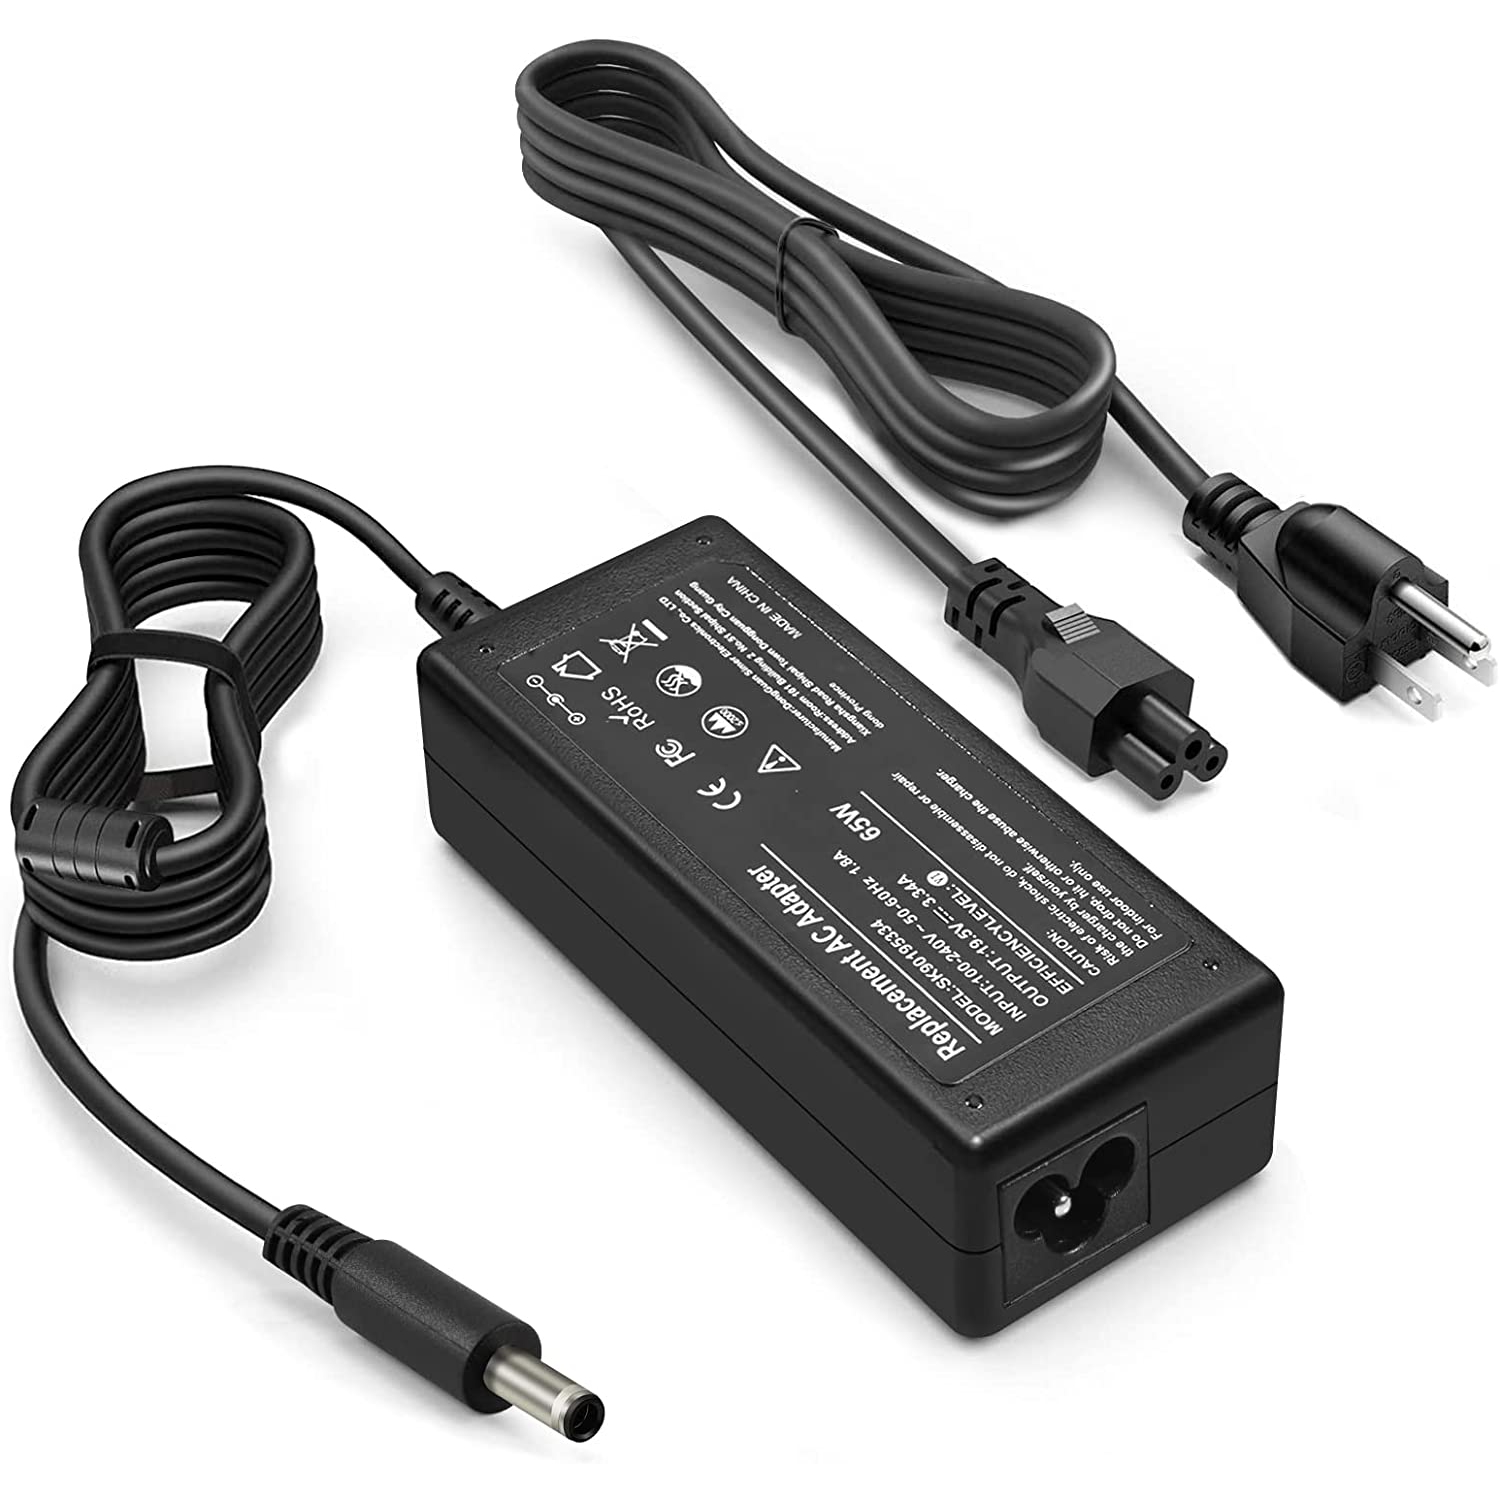 Stroudtech 65W 4.5*3.0mm Laptop Charger for Dell Inspiron 15 3000 5000 5100 7000 11 3000 3147 Series 3583 5555 5558 5559 5578 5758 5755